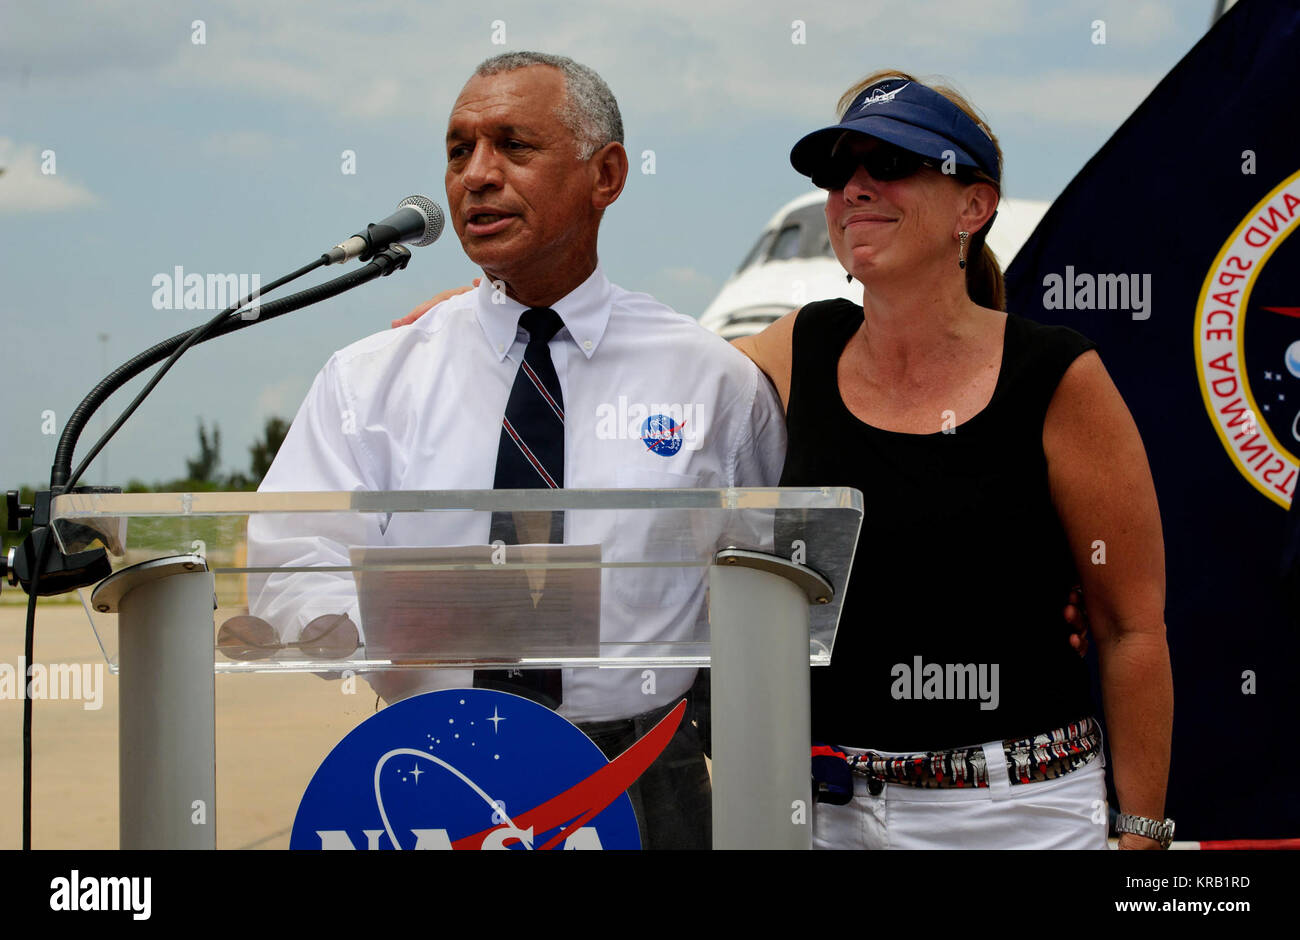 NASA administrator Charles Bolden along with Deputy Administrator Lori Garver addresses Kennedy Space Center employees and contractors as space shuttle Atlantis (STS-135) sits in the background near the Orbiter Processing Facility (OPF) at a wheels stop event, Thursday, July 21, 2011, in Cape Canaveral, Fla. Atlantis returned to Kennedy early Thursday following a 13-day mission to the International Space Station (ISS) and marking the end of the 30-year Space Shuttle Program. Overall, Atlantis spent 307 days in space and traveled nearly 126 million miles during its 33 flights. Atlantis, the fou Stock Photo